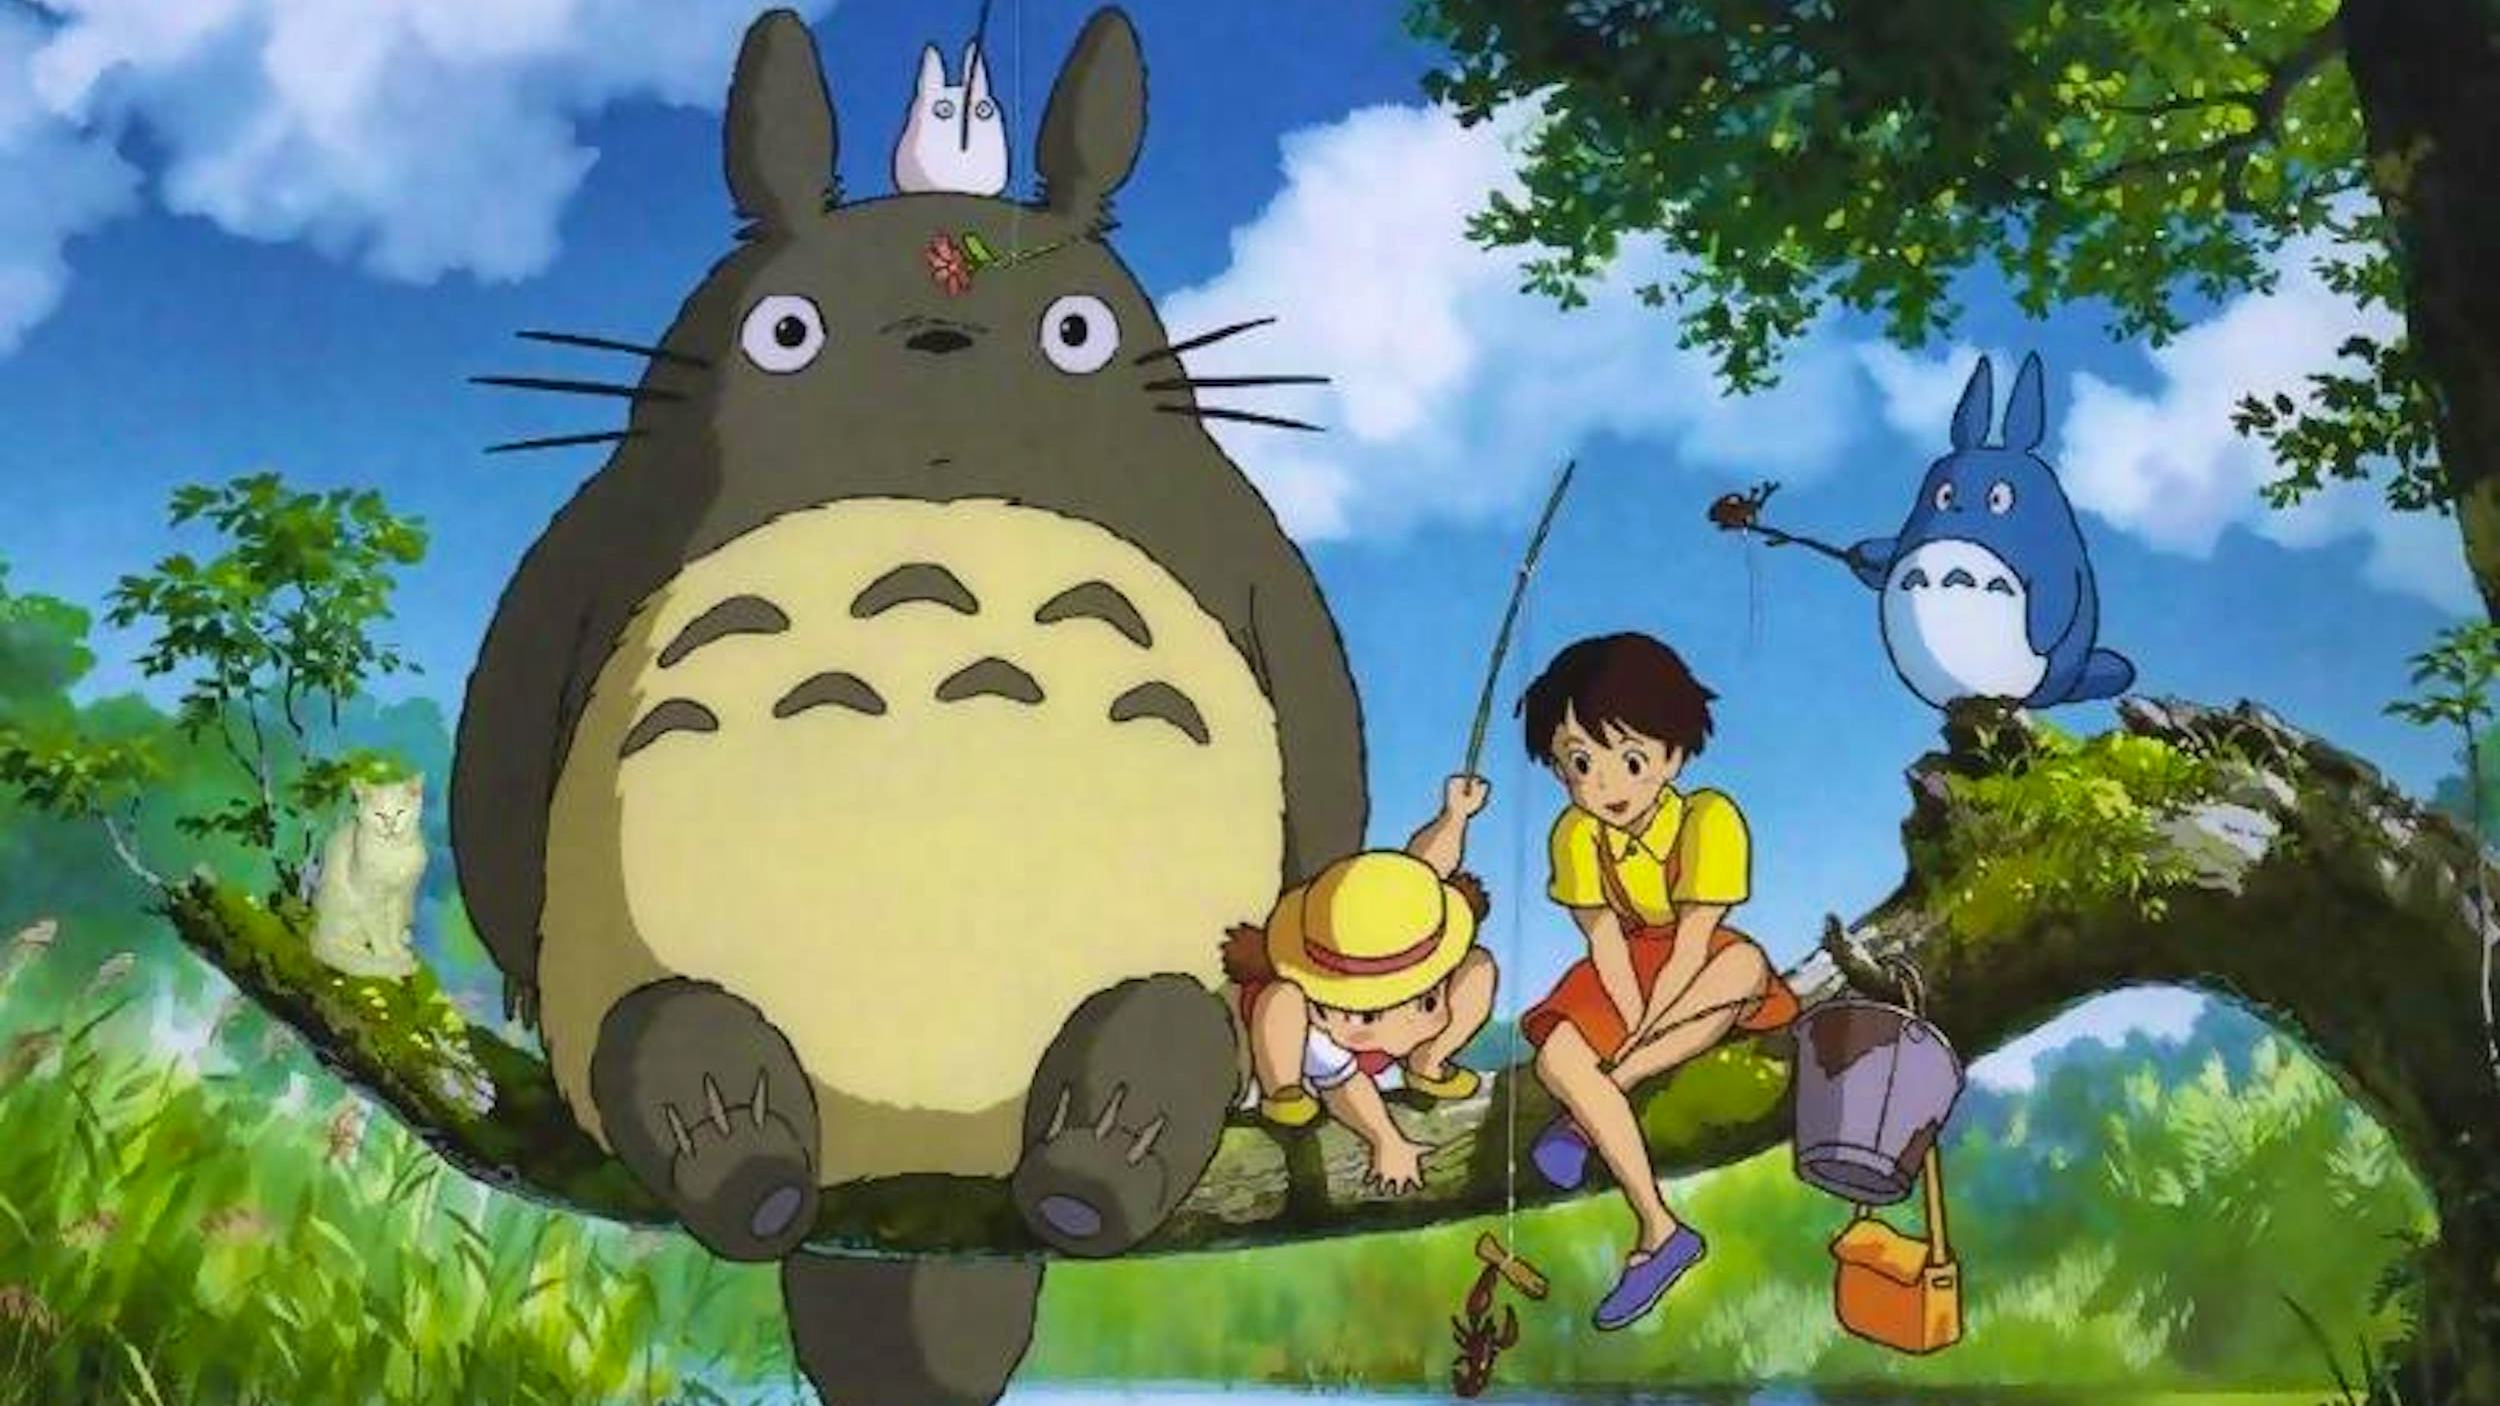 Newsela - Japan's Studio Ghibli teaches fans how to draw its beloved  character Totoro